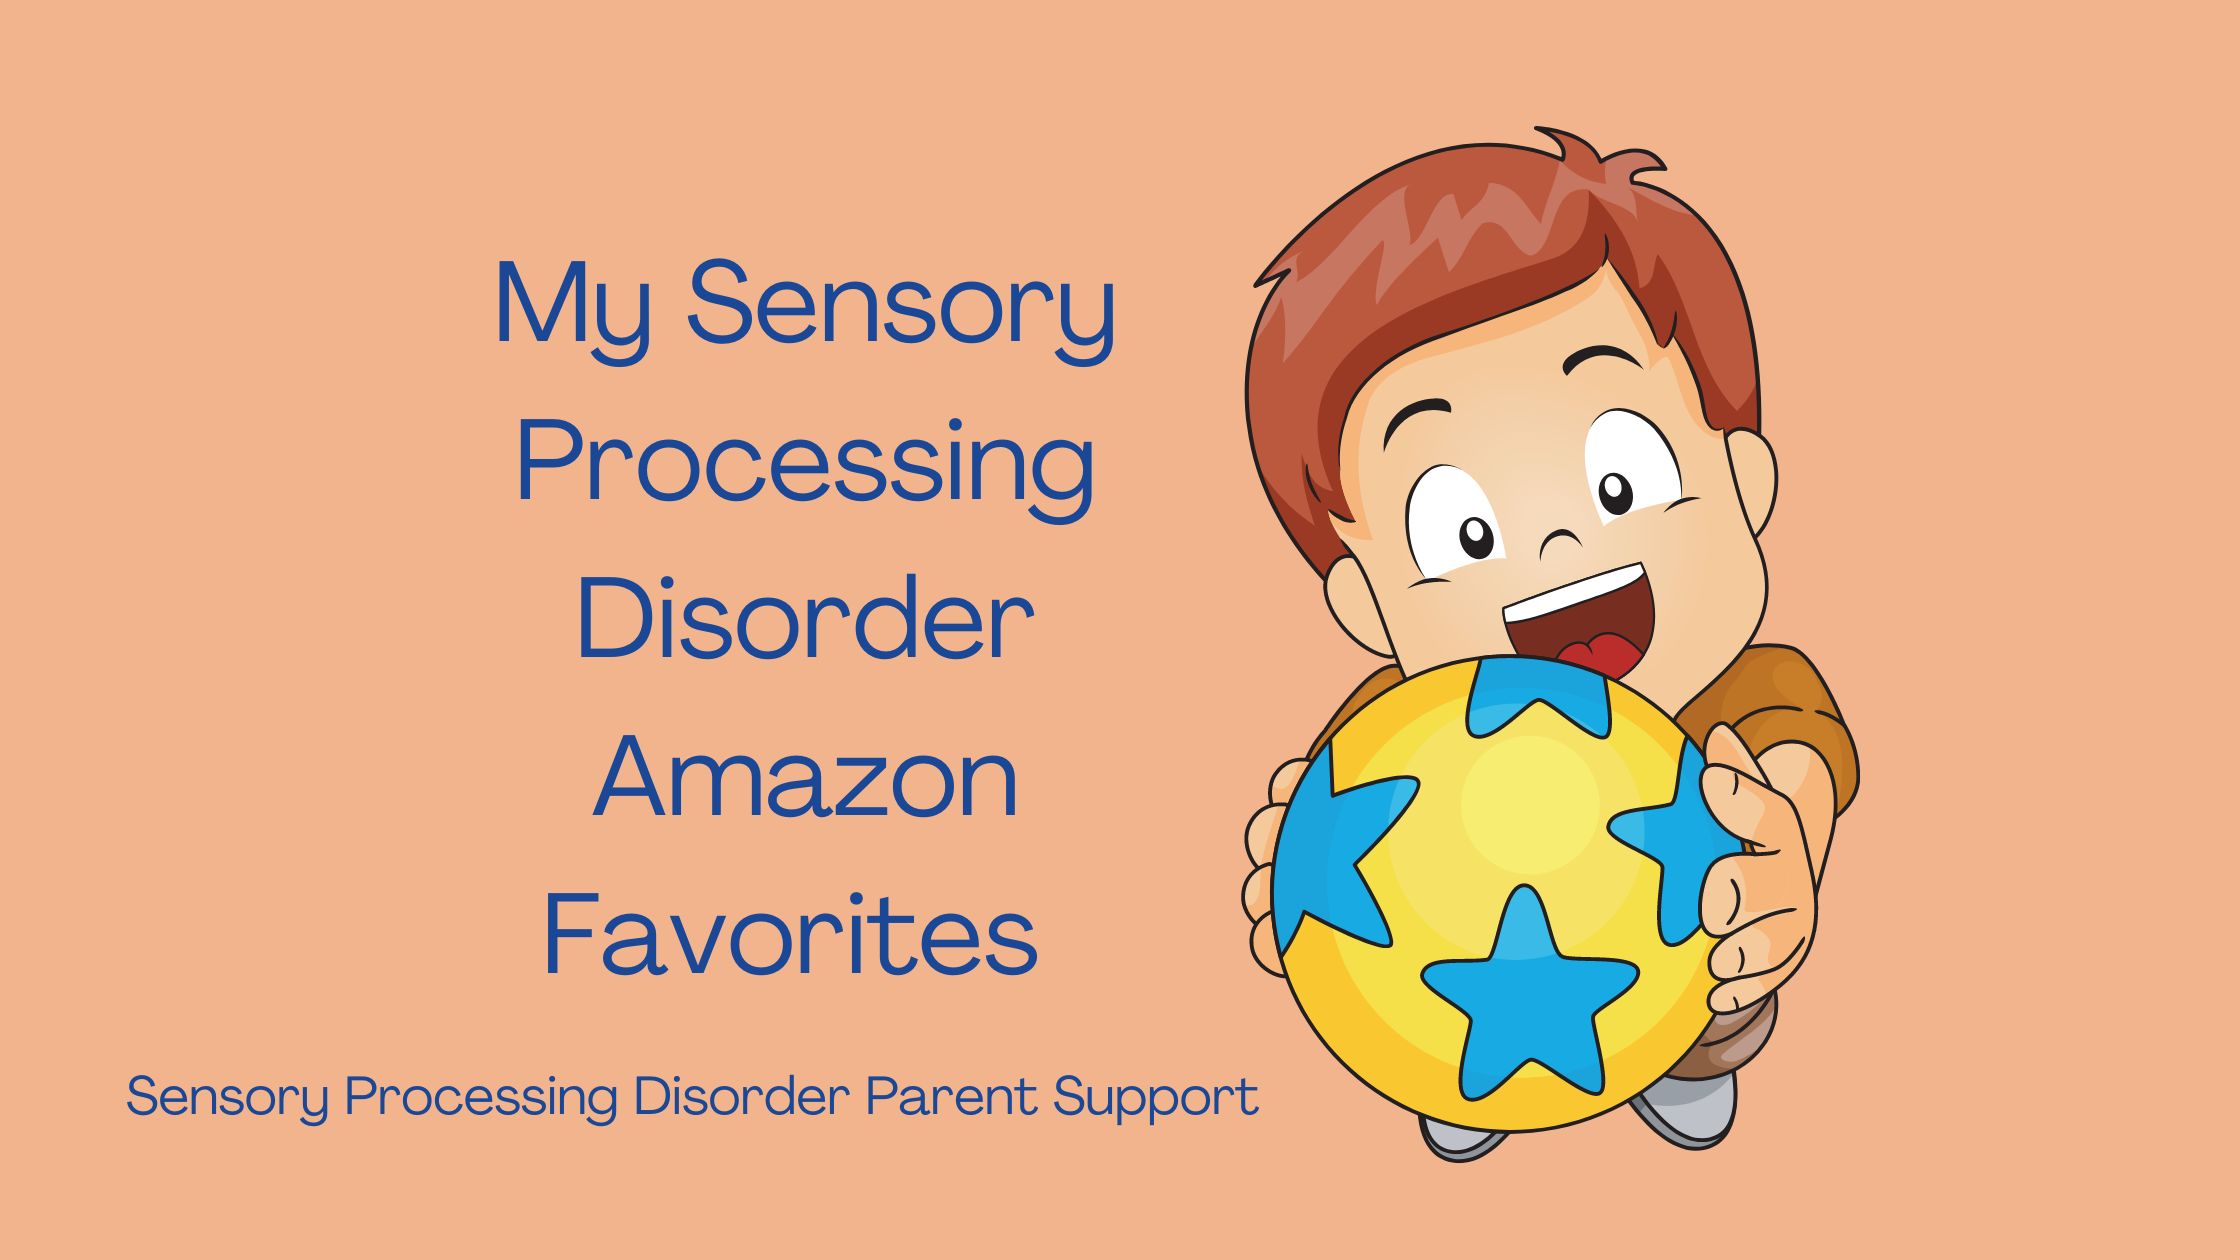 child with sensory processing disorder holding a ball My Sensory Processing Disorder Amazon Favorites